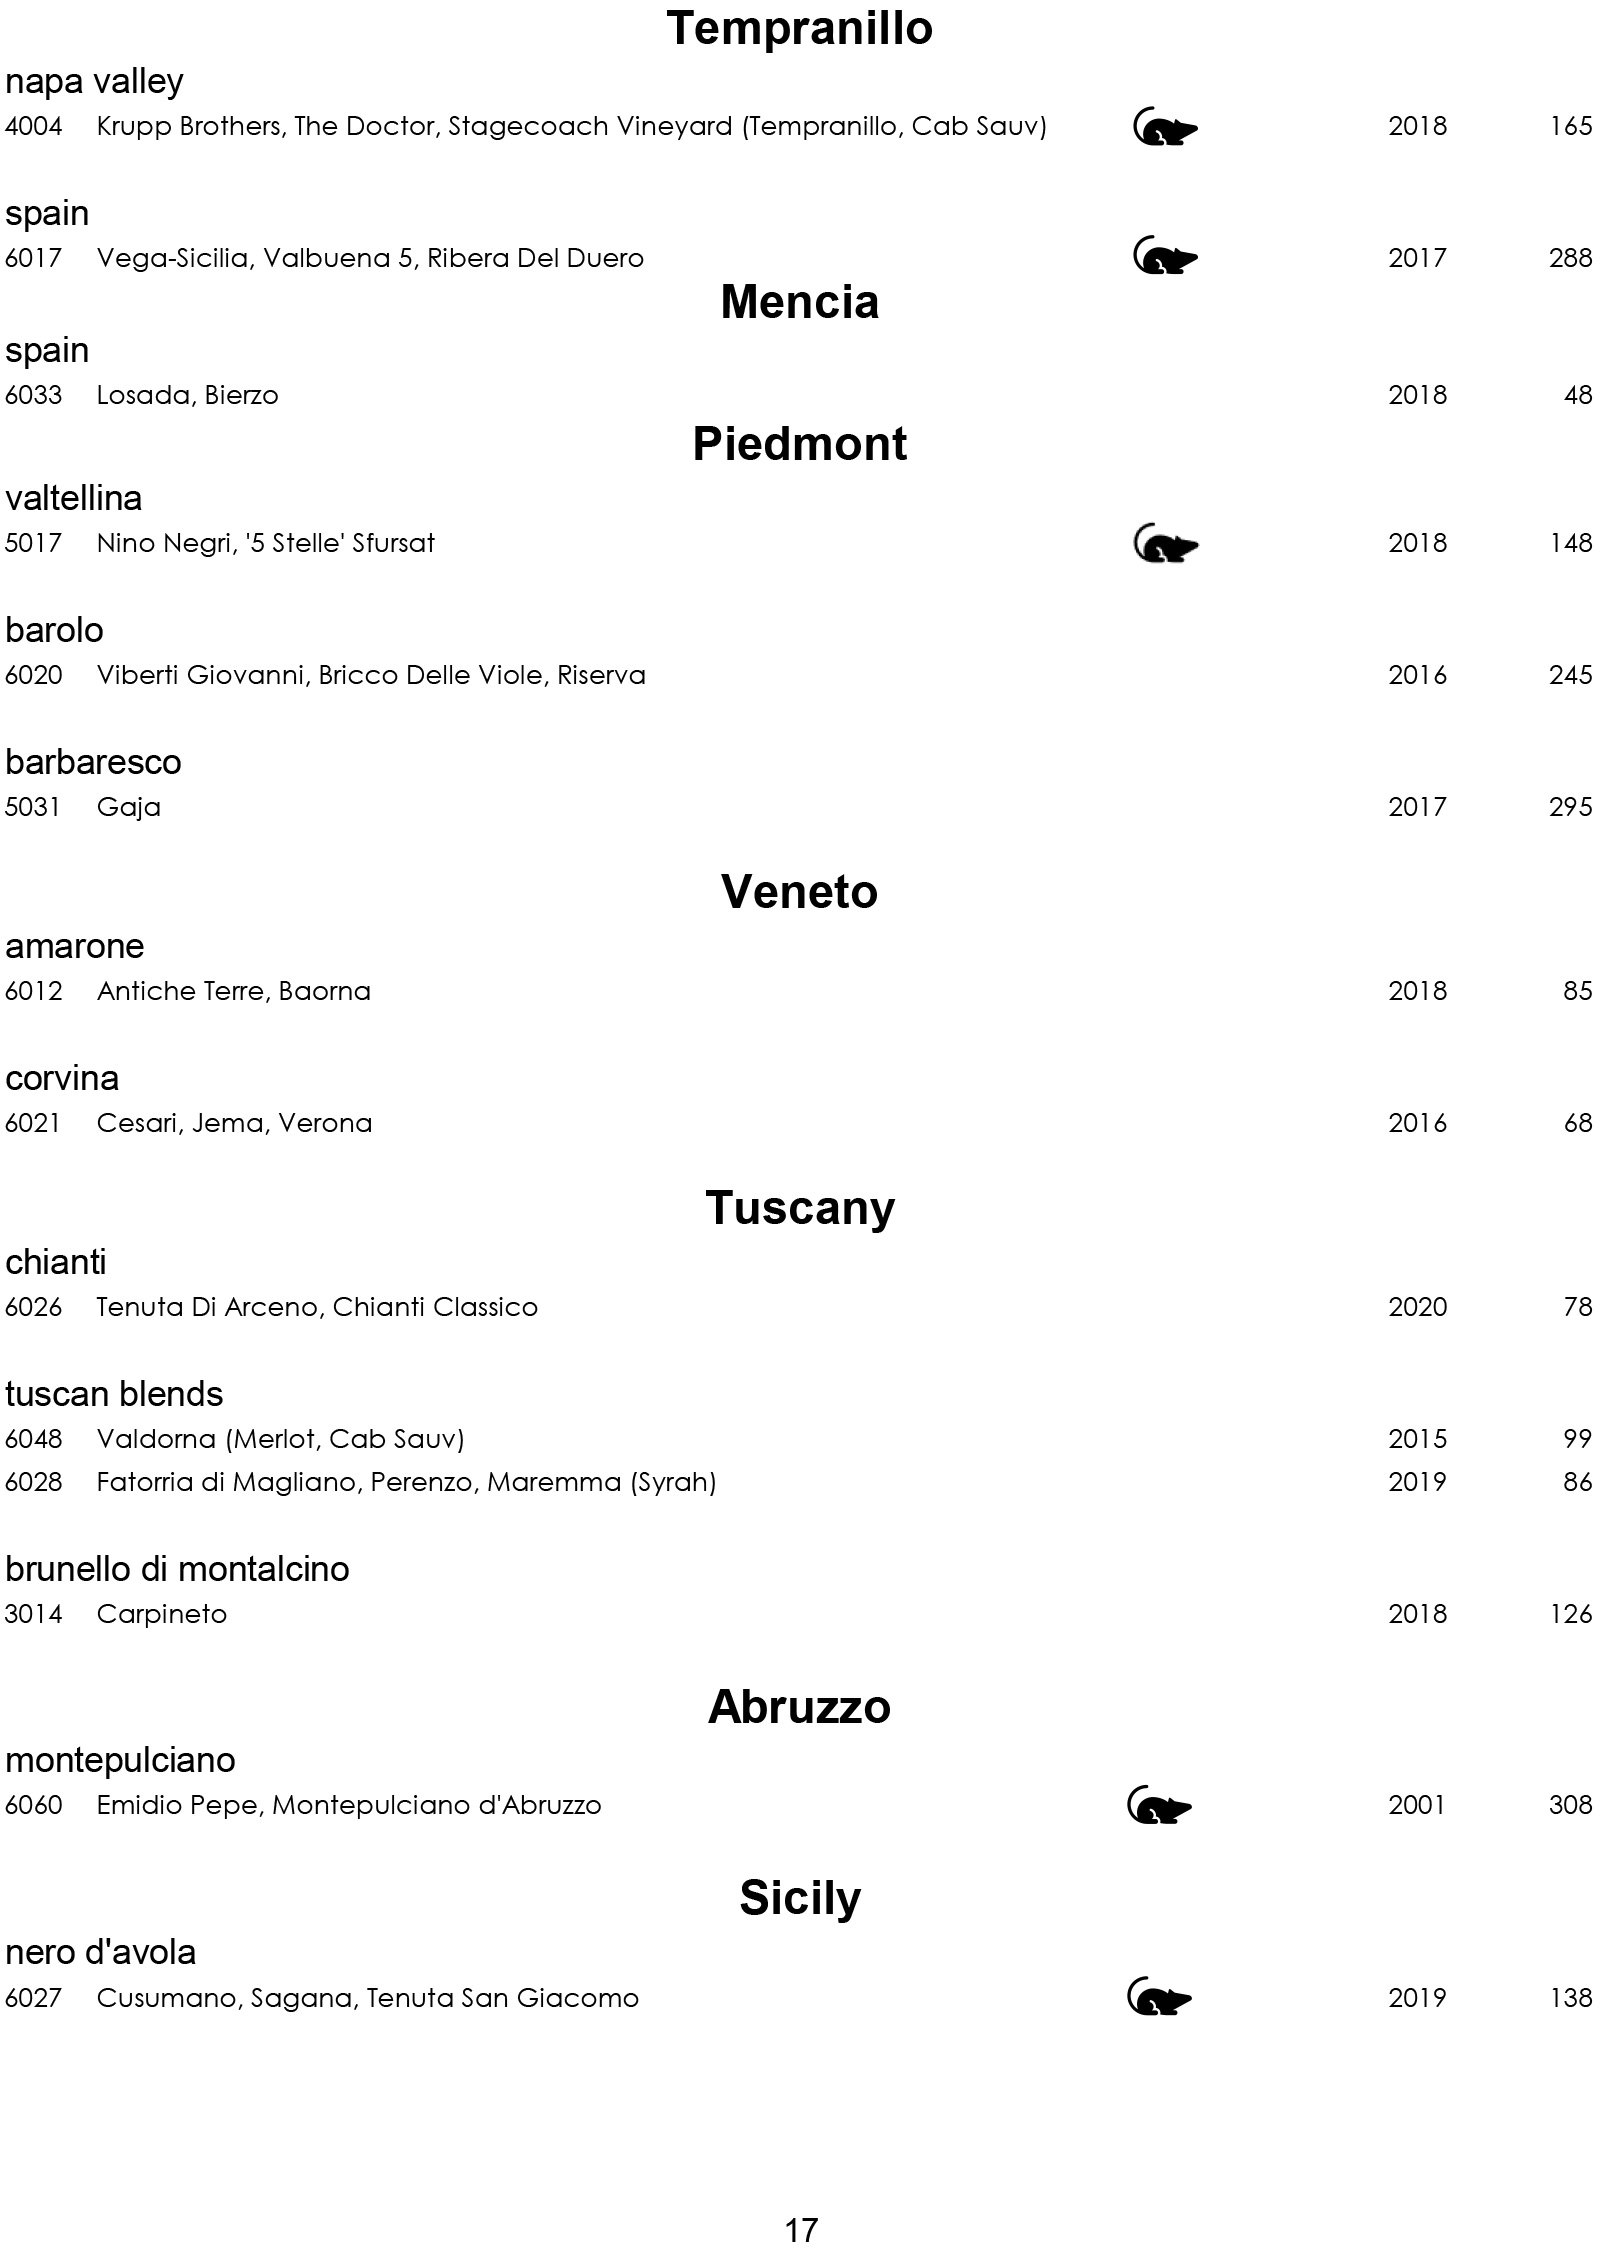 Wine List for Rat's Restaurant - Red Wines Continued